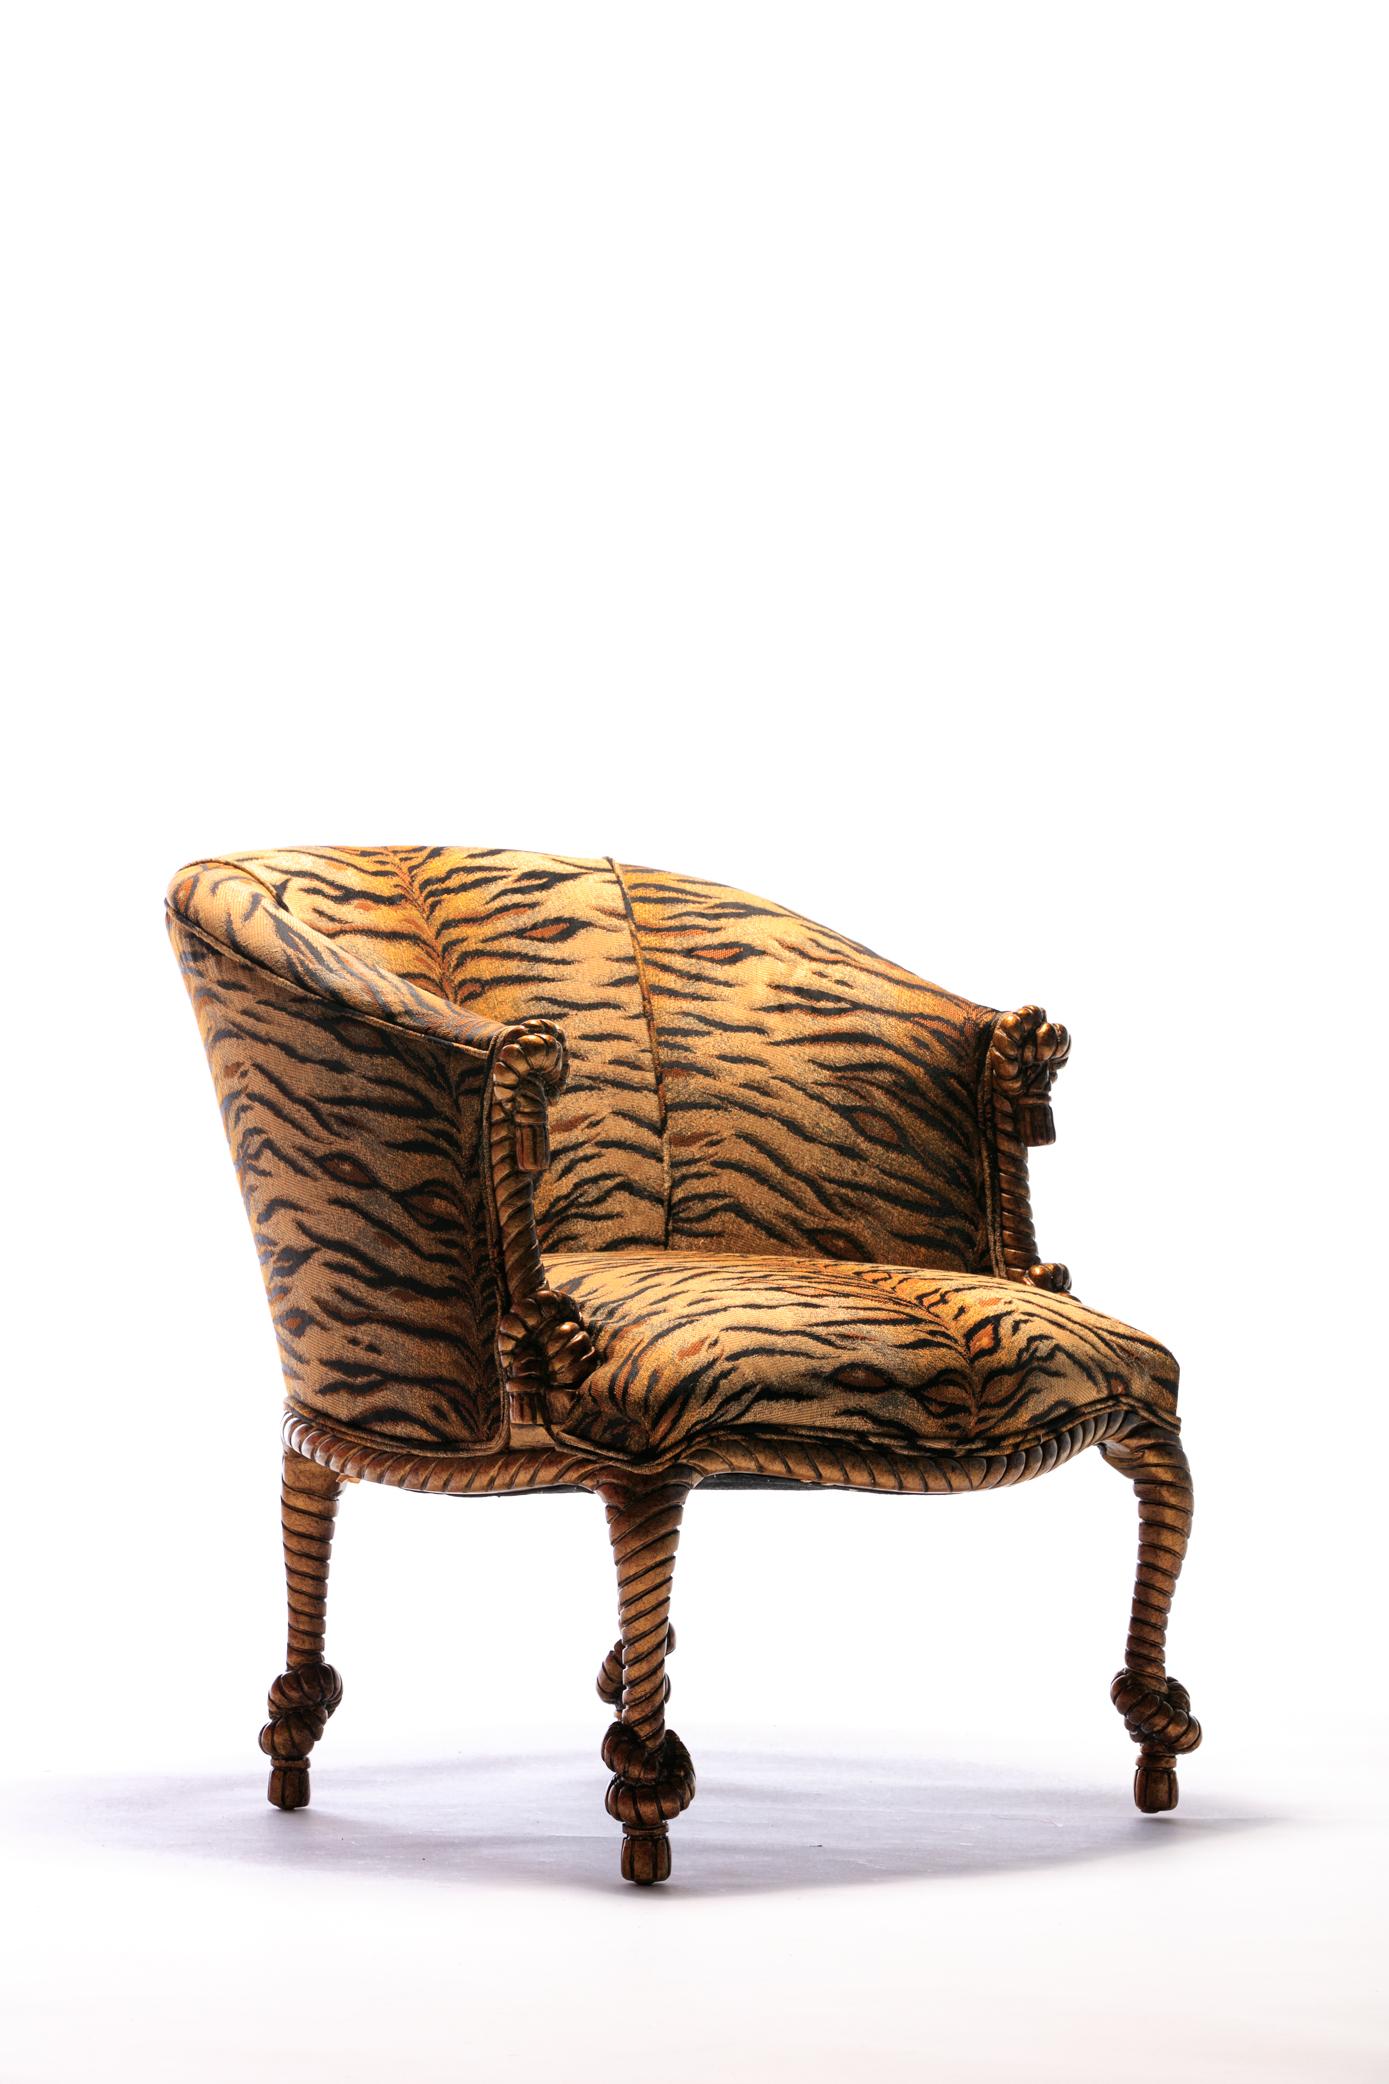 20th Century Vintage Napoleon III Style Tiger Gilt Rope and Tassel Carved Armchairs